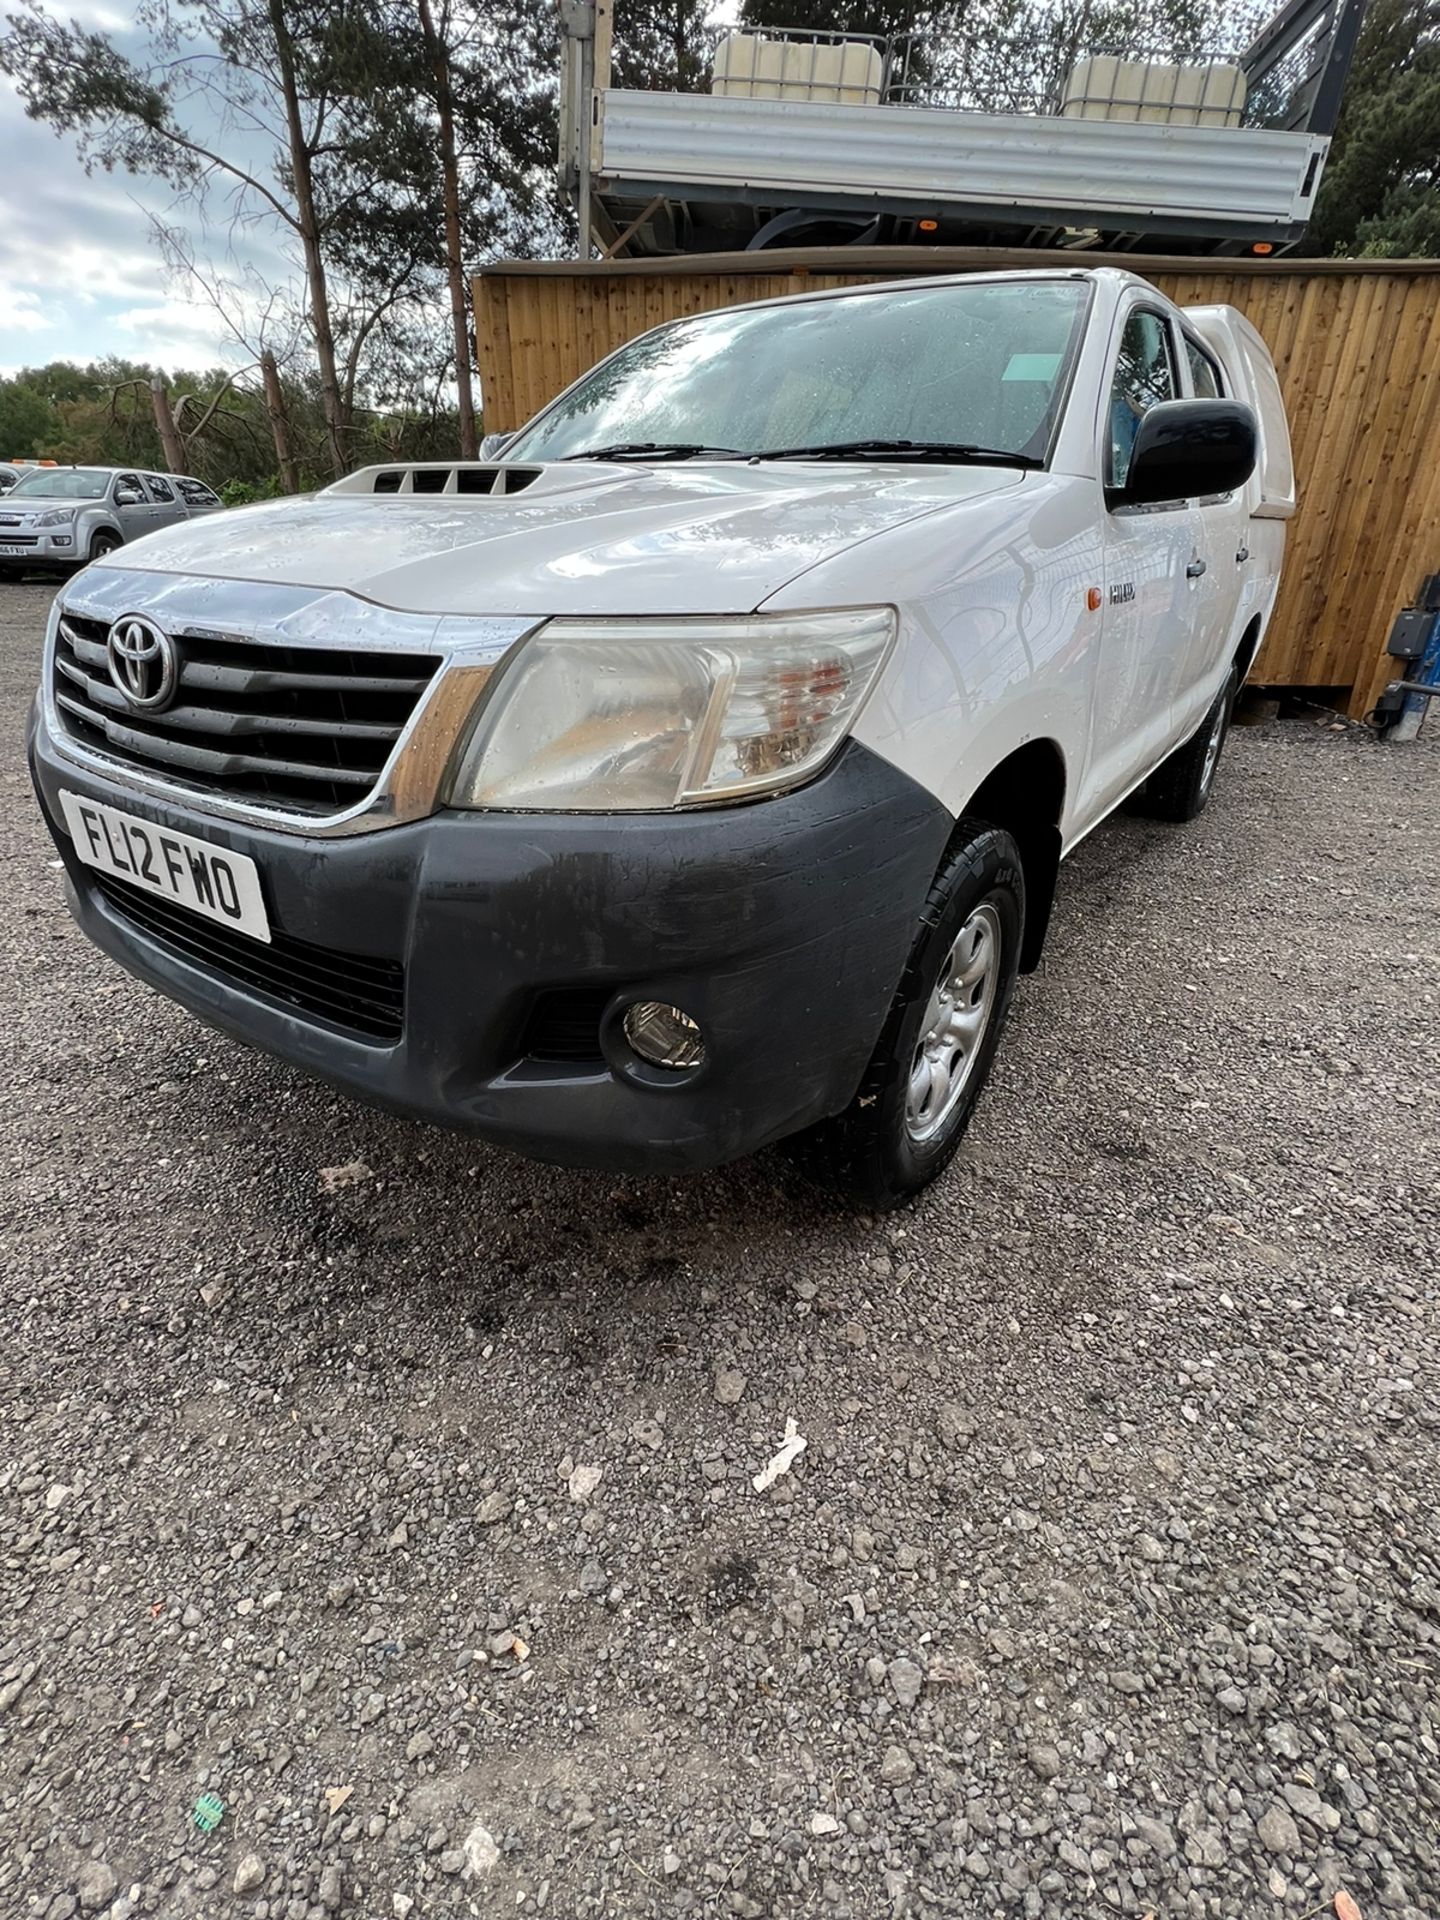 2012 TOYOTA HILUX HL2 PICK UP - DAB RADIO - A/C - ELECTRIC MIRRORS. - Image 3 of 14